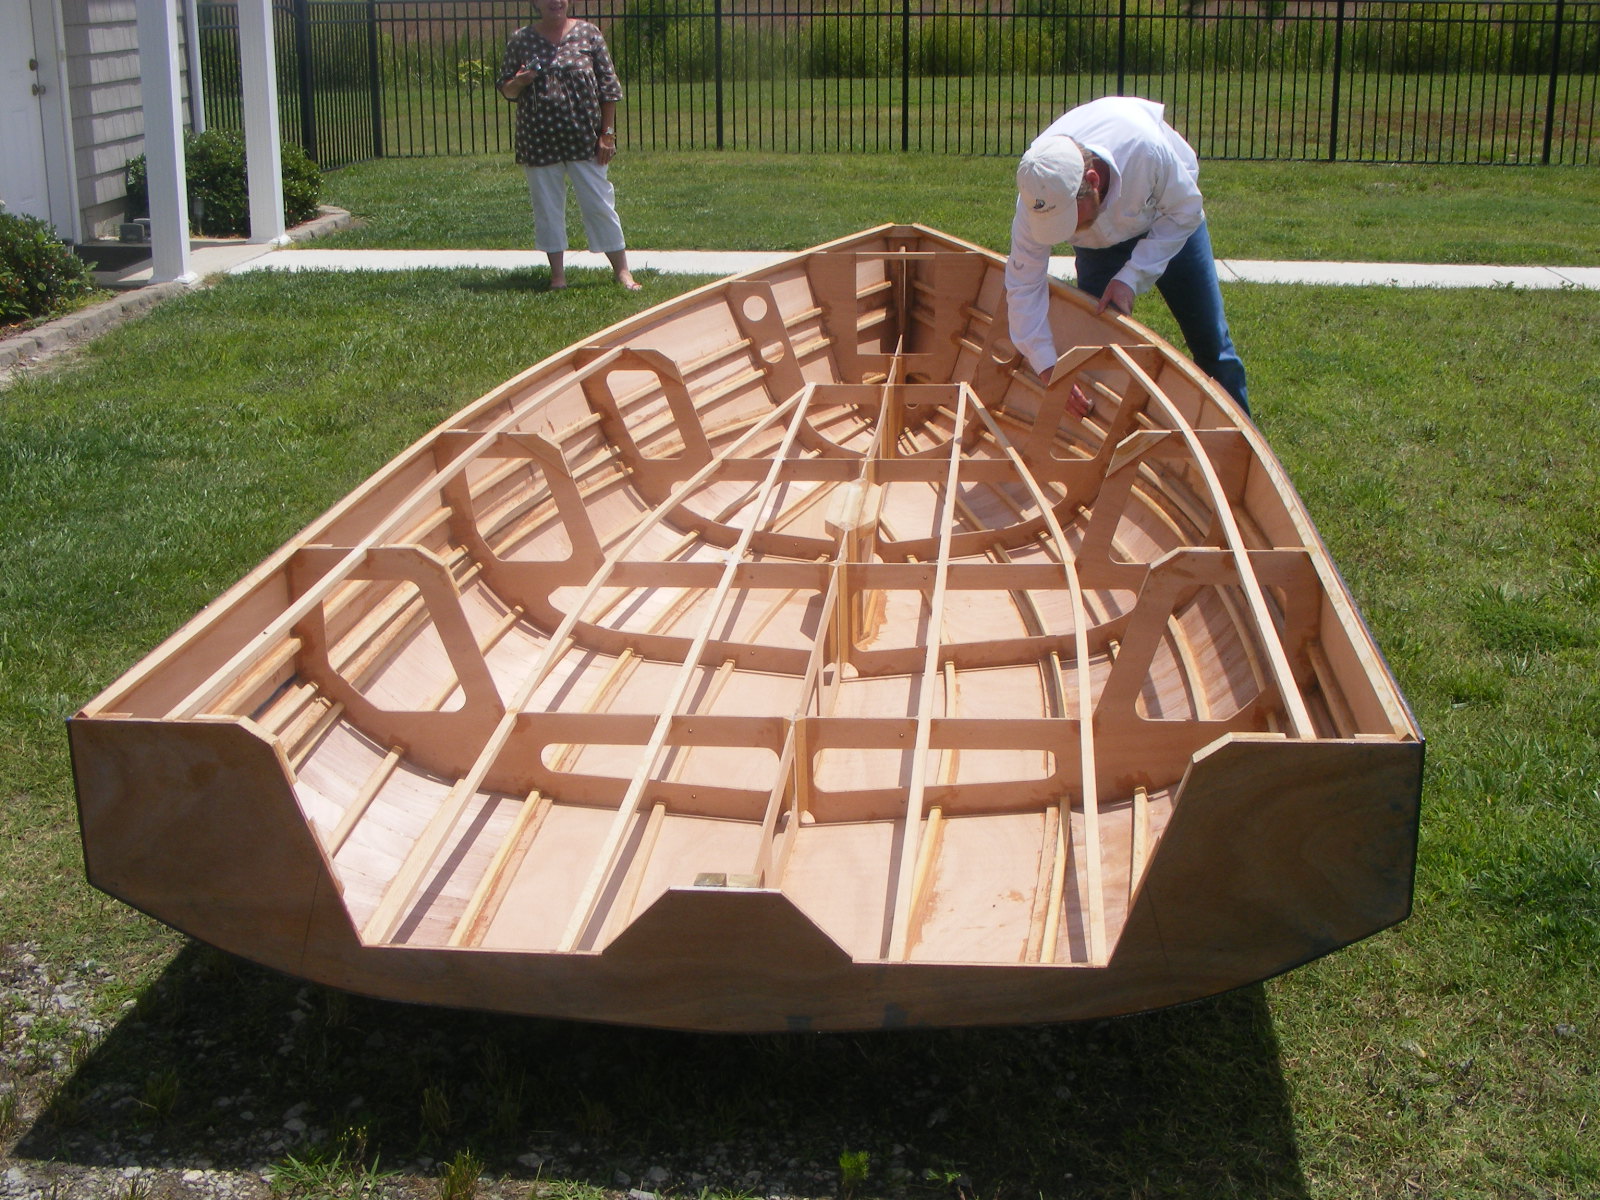 Plywood Boat Building